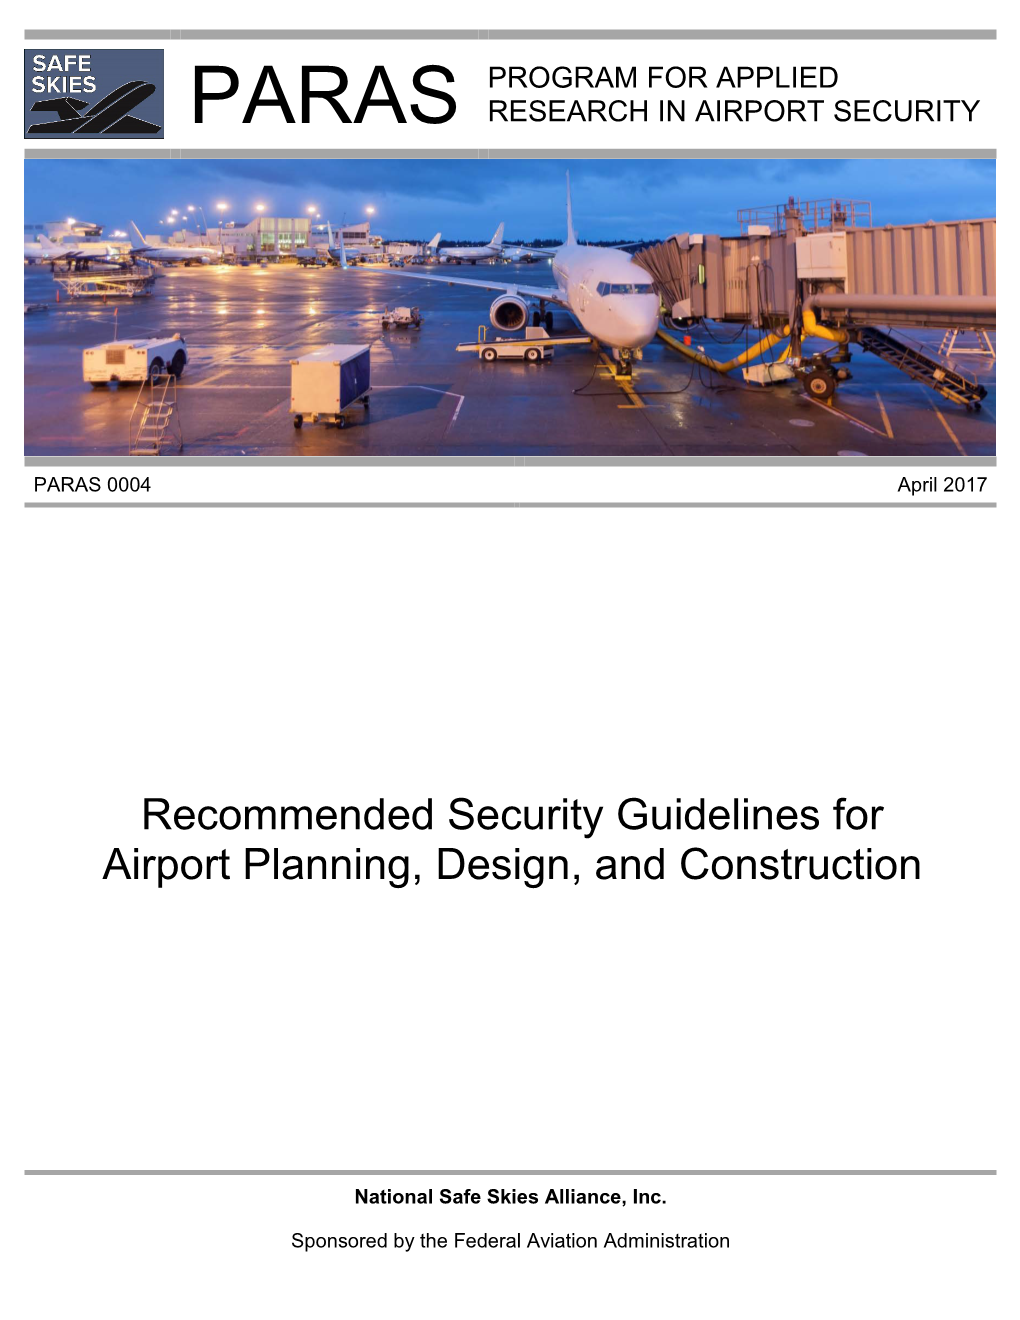 Safe Skies PARAS 0004: Recommended Security Guidelines